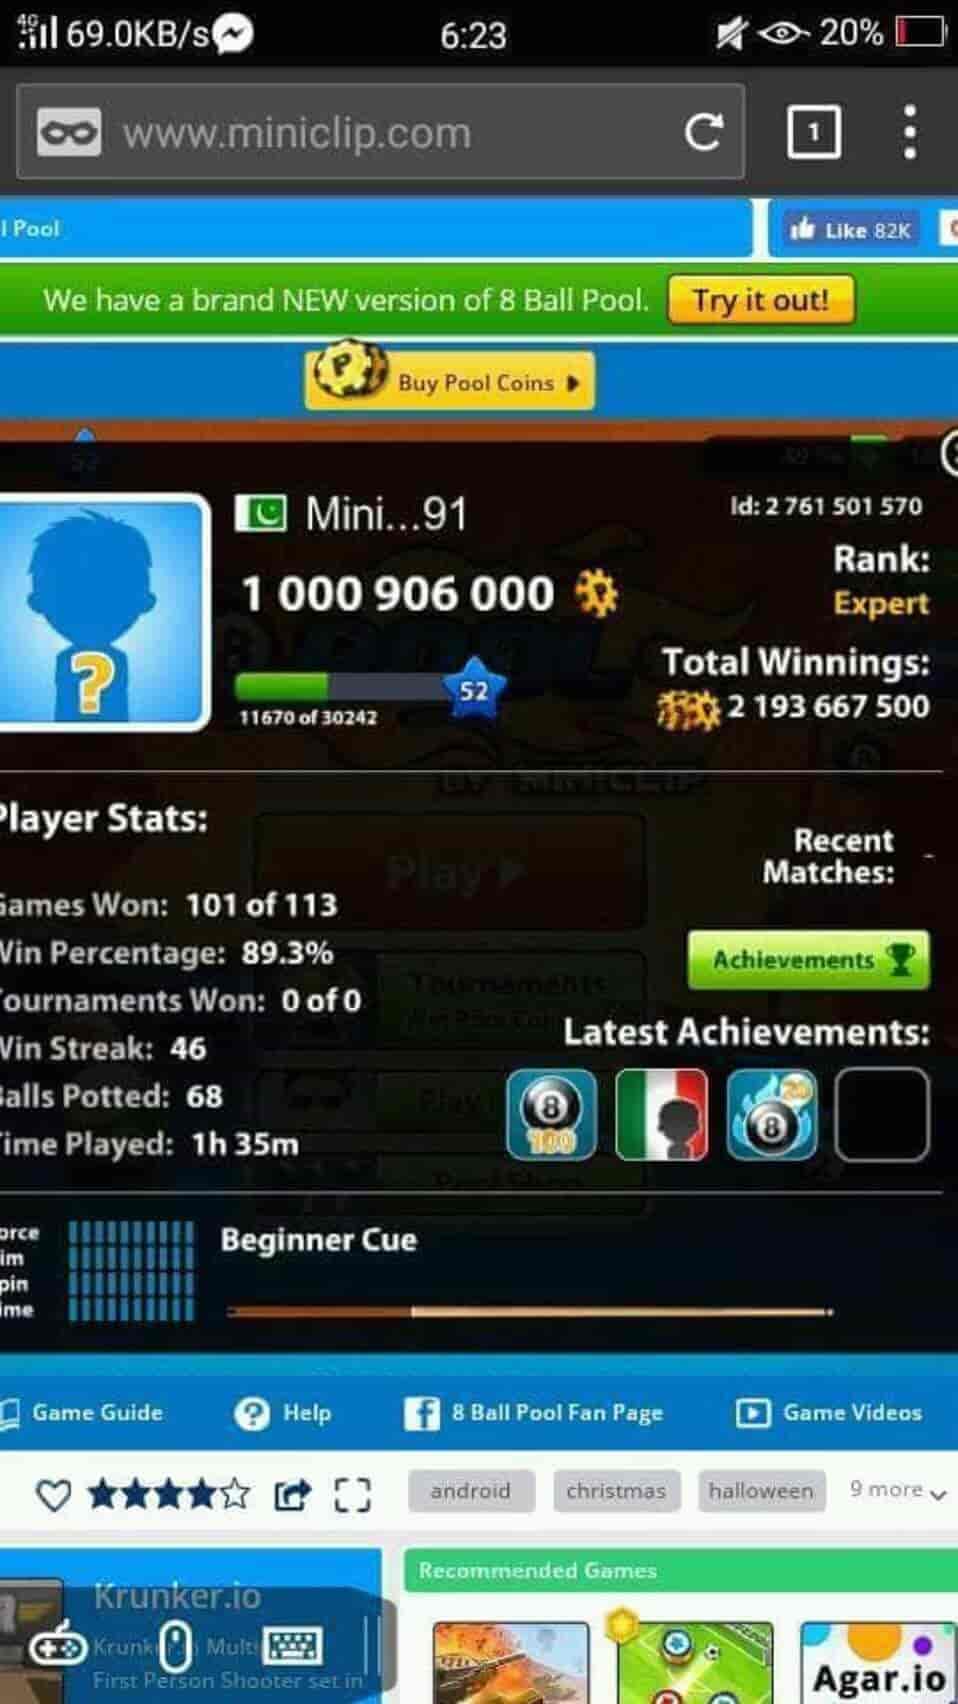 Cheap 8 Ball Pool Coins, Buy Safe 8 Ball Pool Cash, Free 8BP Coins iOS & Android On Sale - ecobt.ru